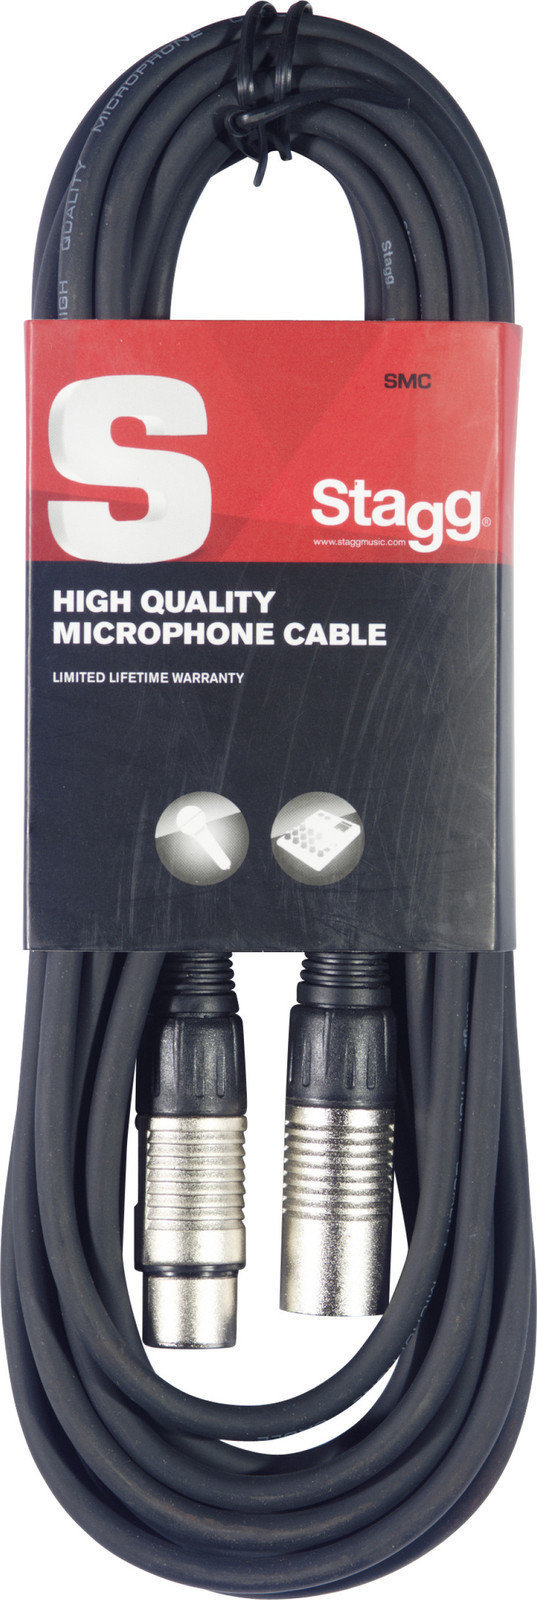 Microphone Cable Stagg SMC10 Black 10 m